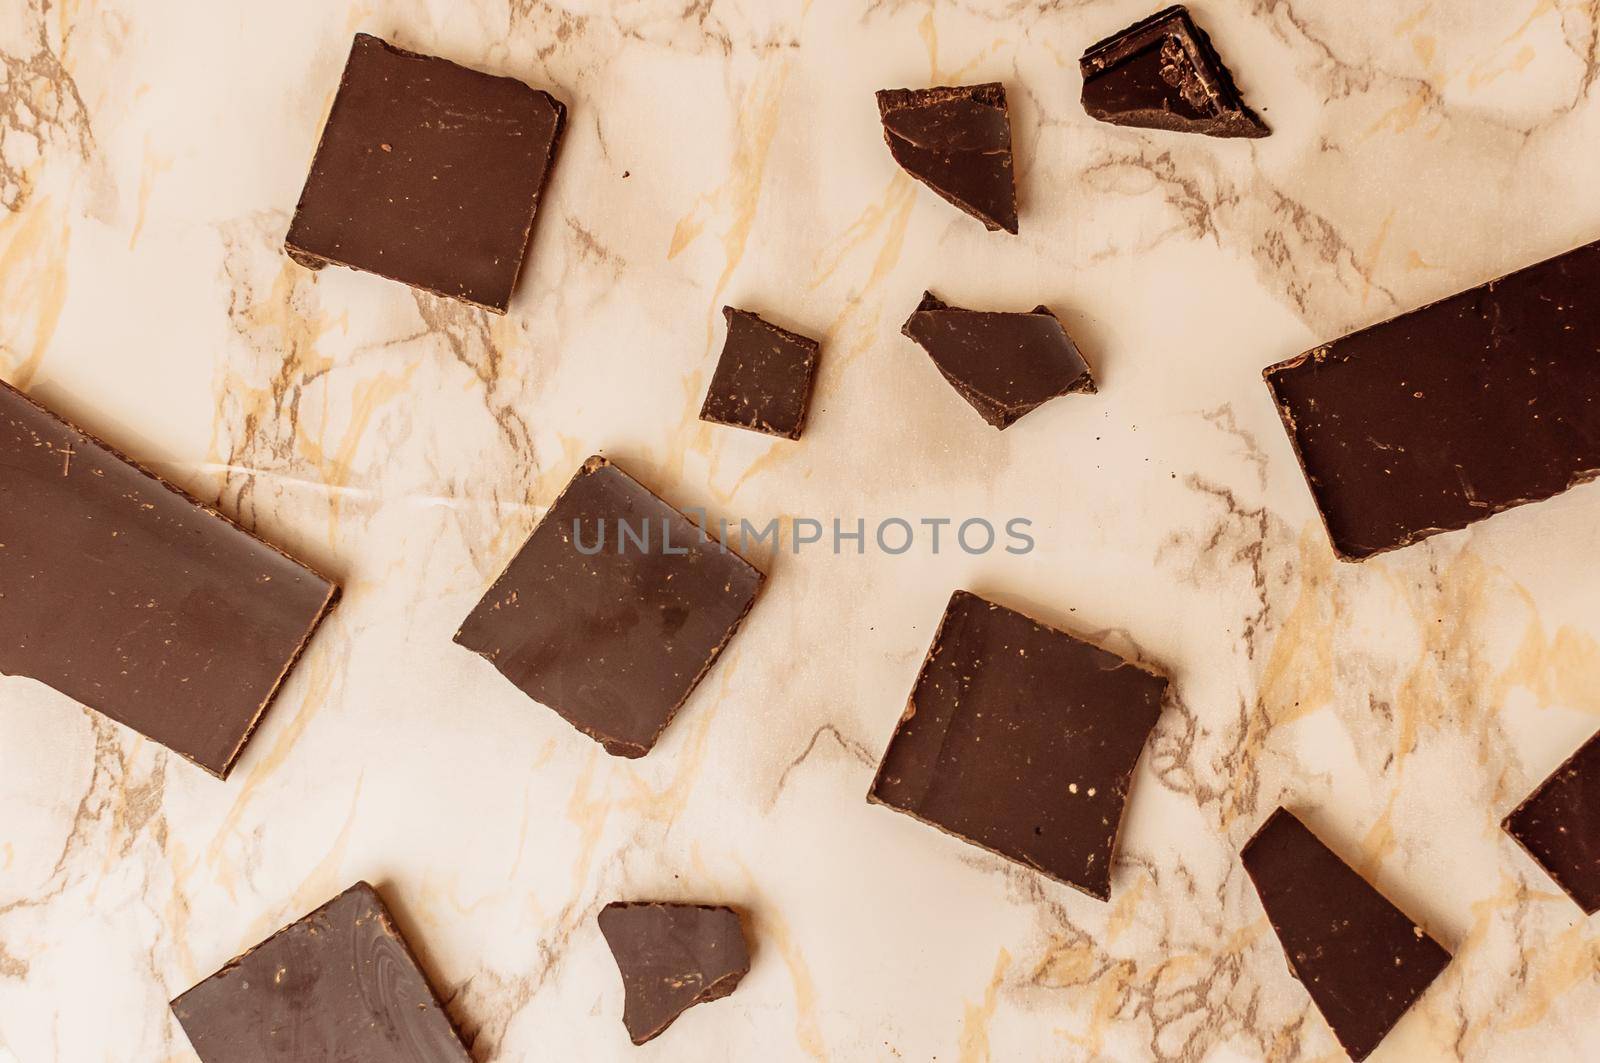 dark chocolate without sugar and gluten free for diabetics and allergics. Pieces of chocolate lie on a marble table.Pattern from chocolate slices